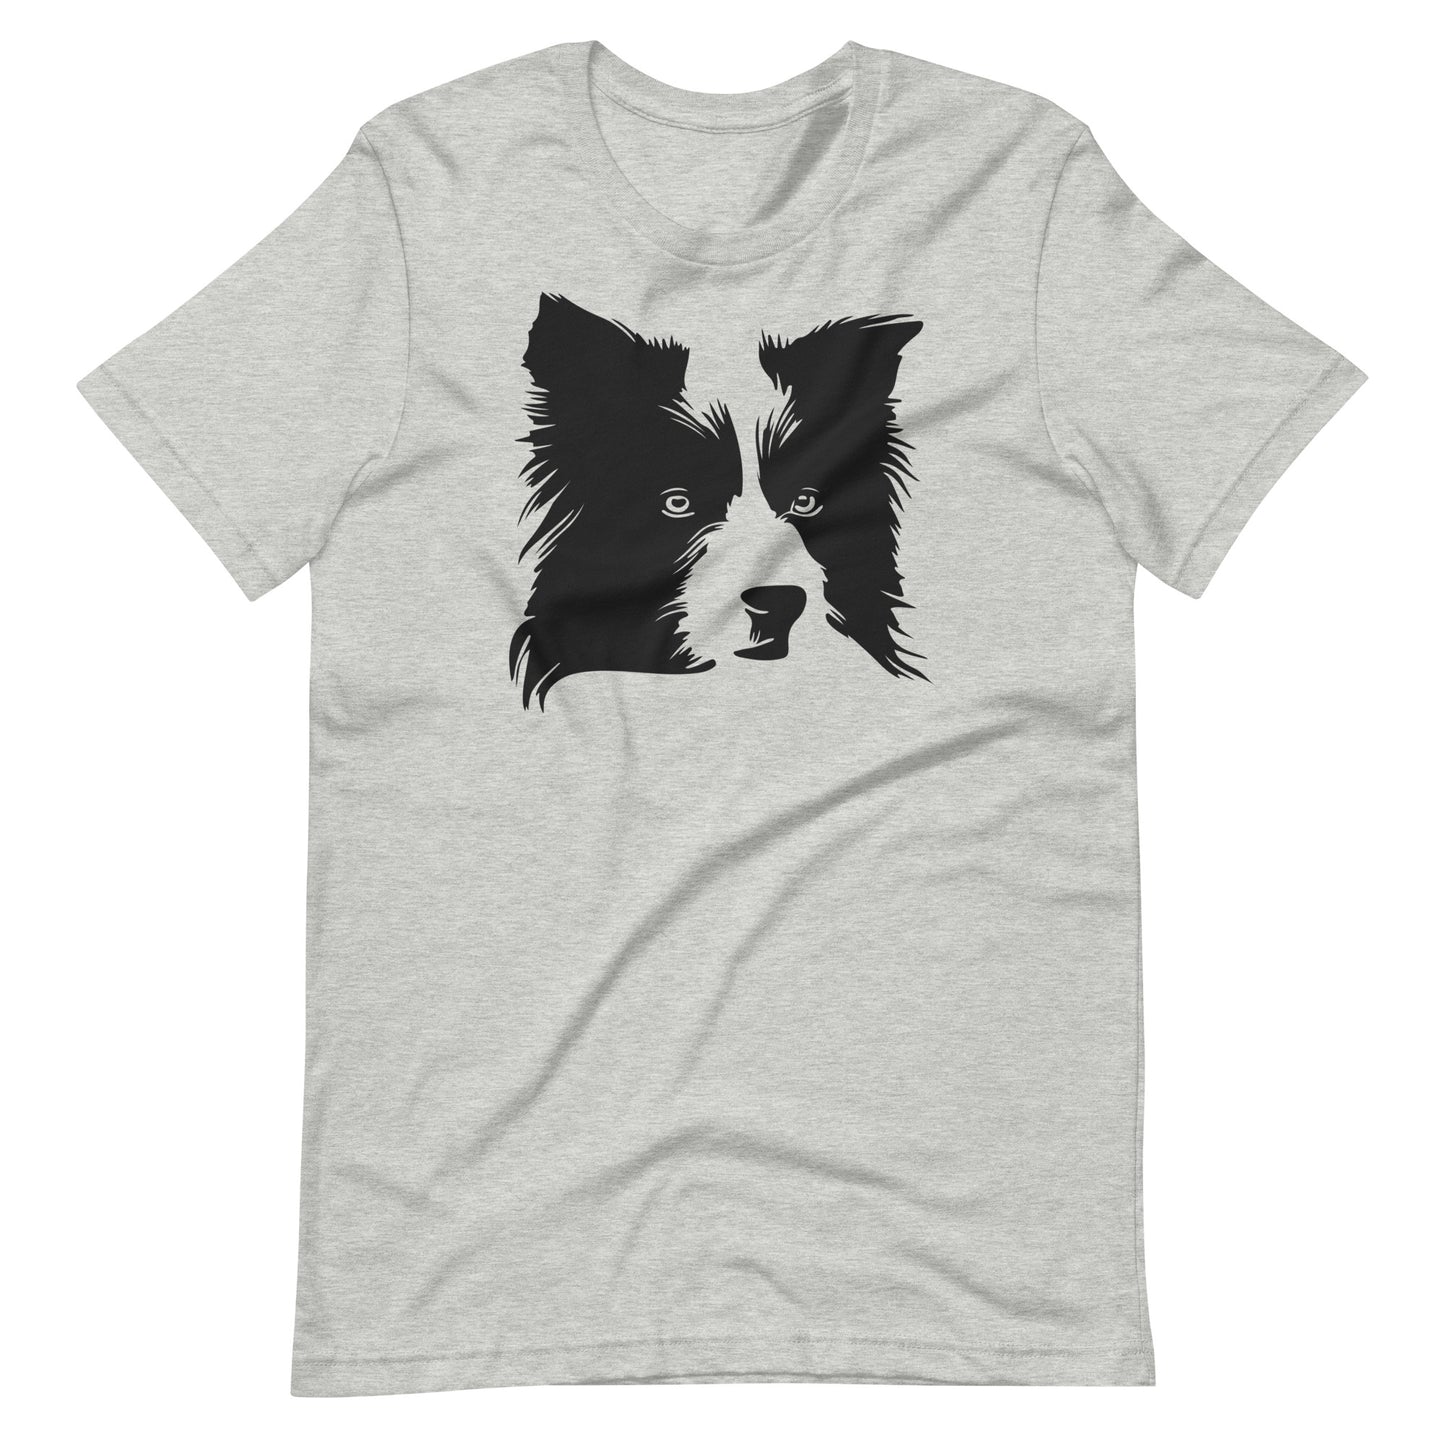 Black Border Collie face silhouette on unisex athletic heather t-shirt